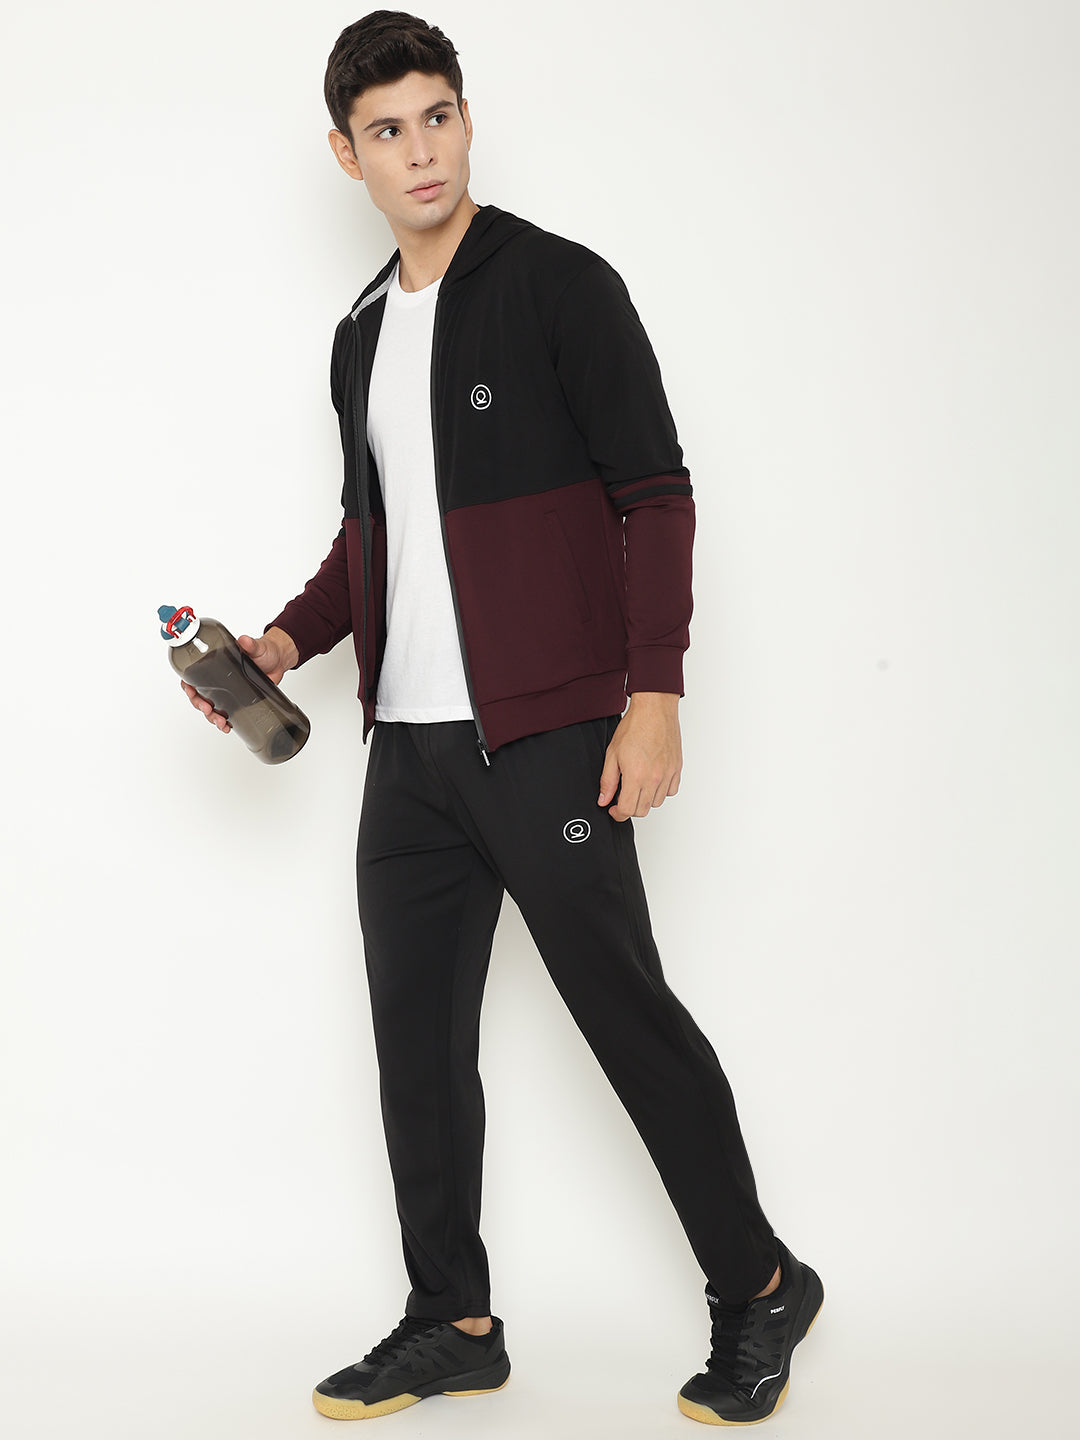 Men's Tracksuit For Athletics Jogging Gym And Sports | CHKOKKO